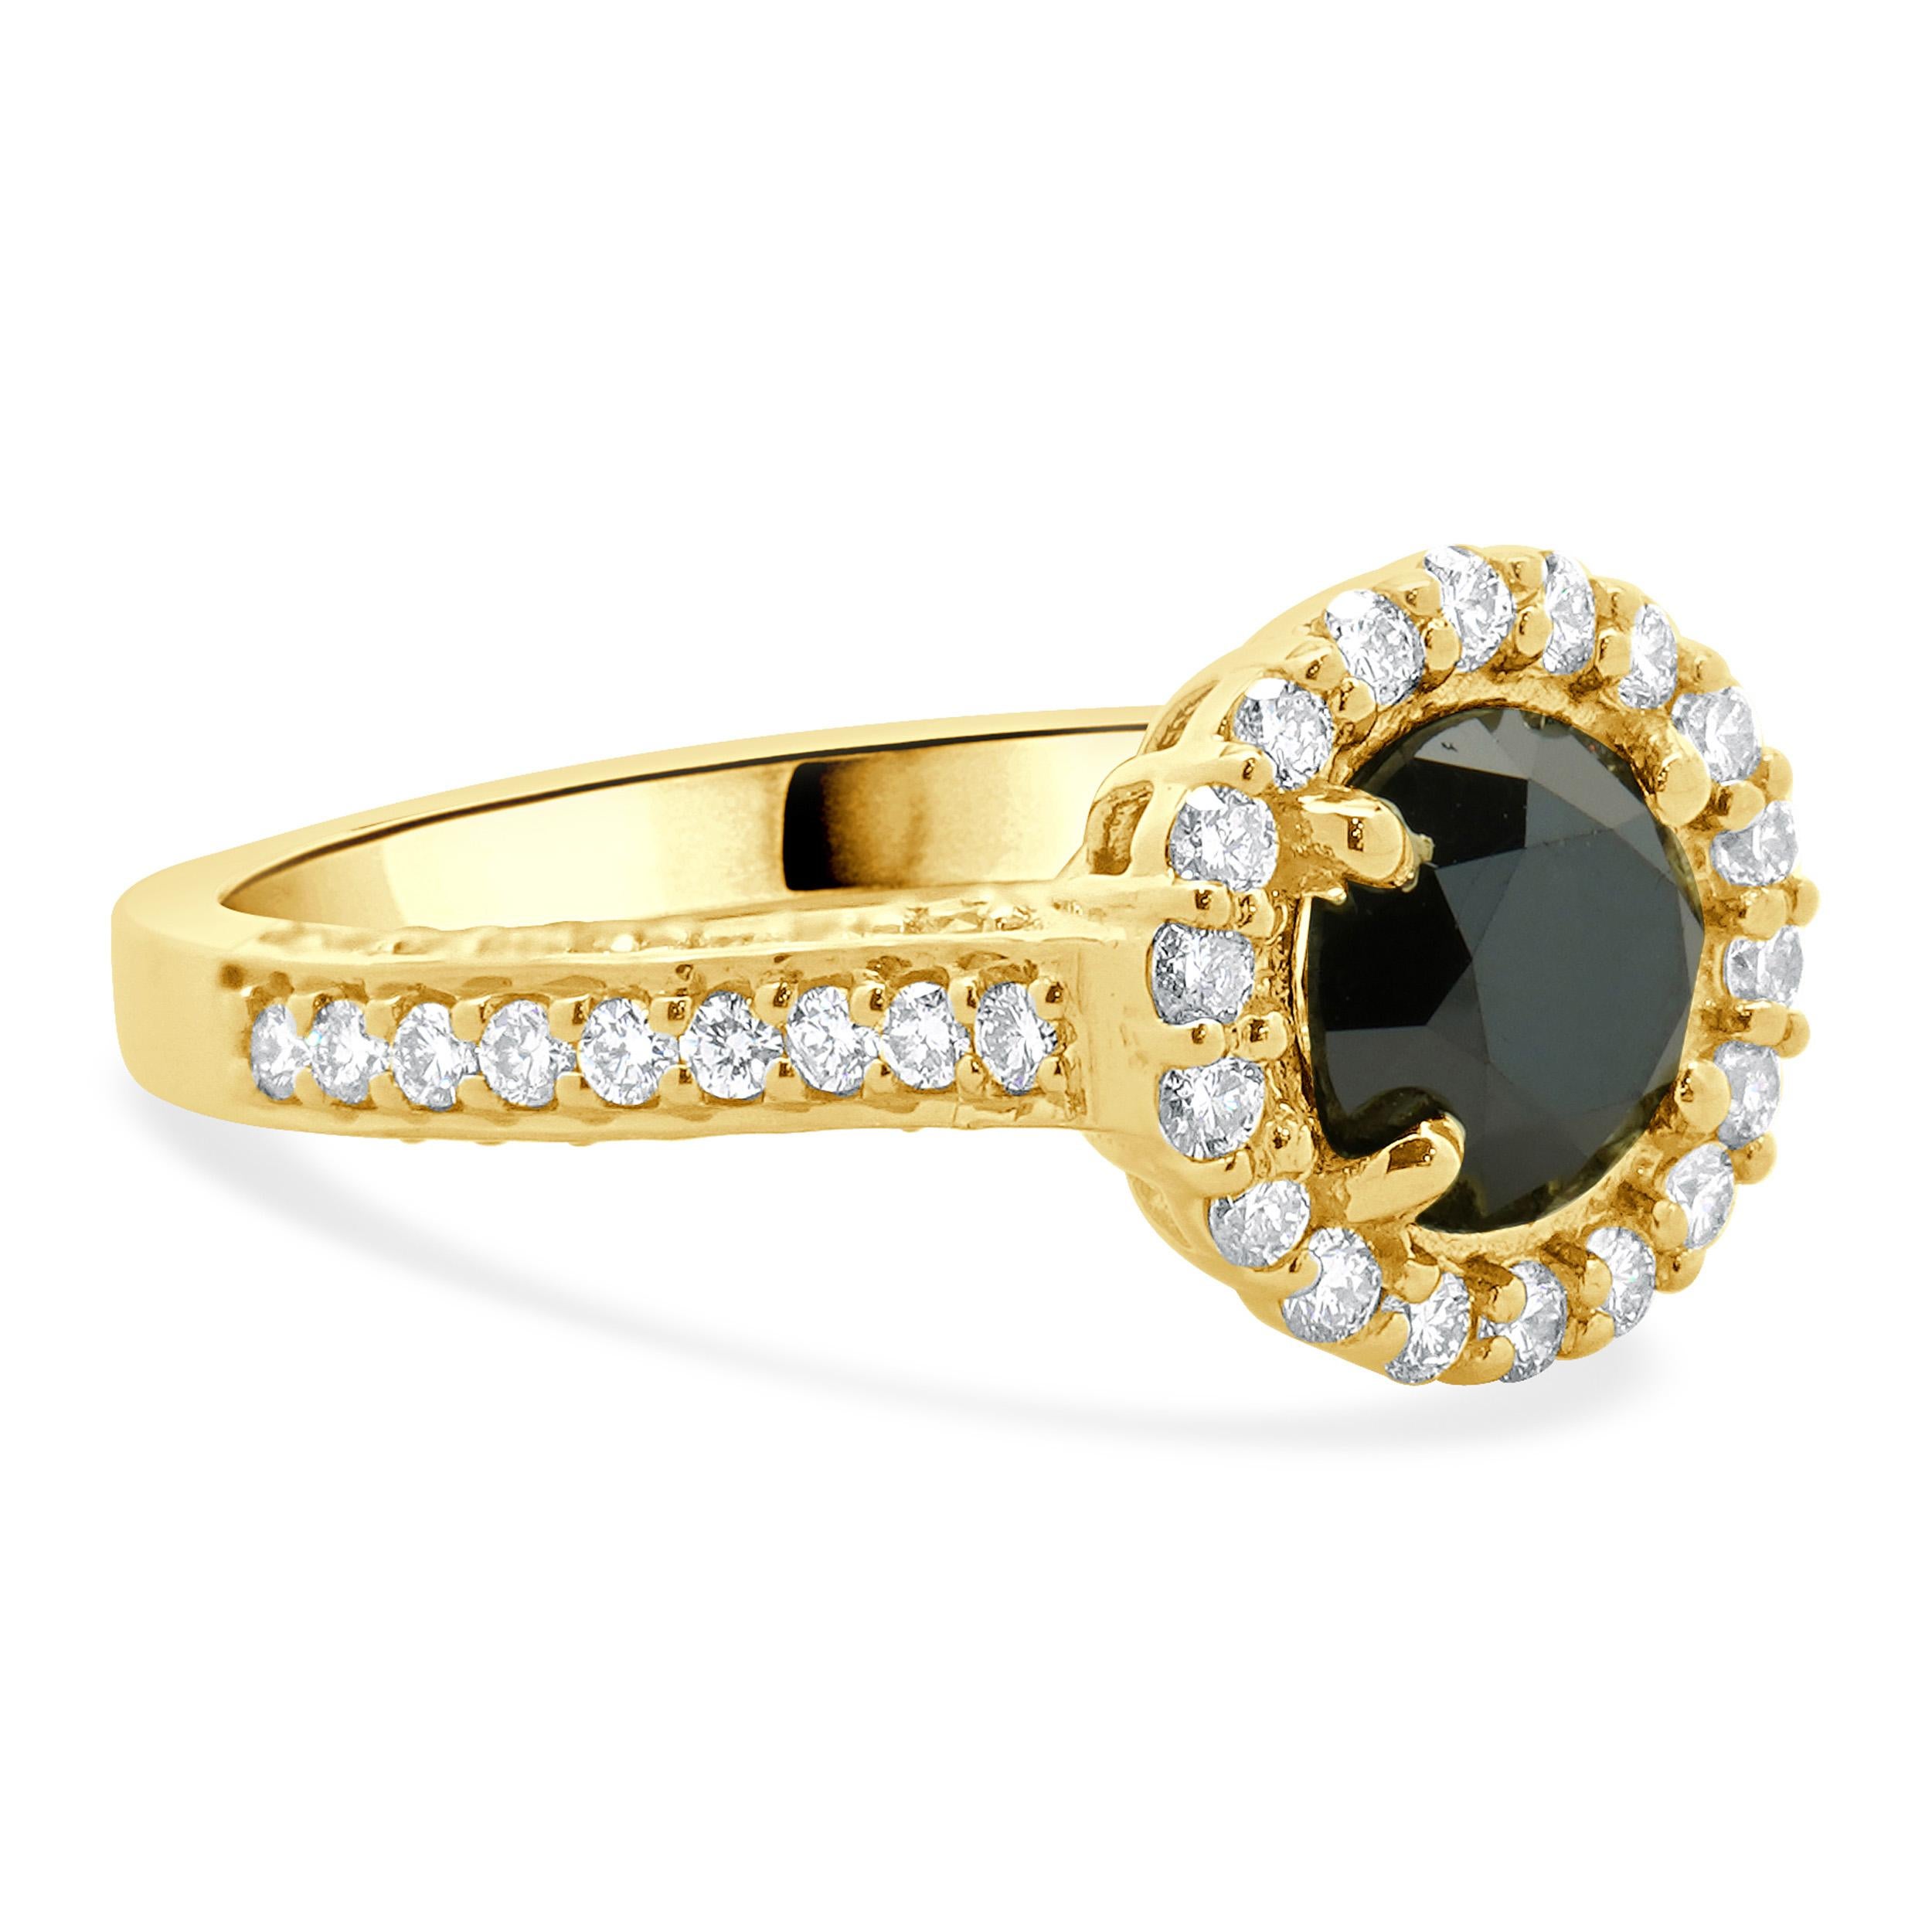 18 Karat Yellow Gold Black Round Brilliant Cut Diamond Engagement Ring In Excellent Condition For Sale In Scottsdale, AZ